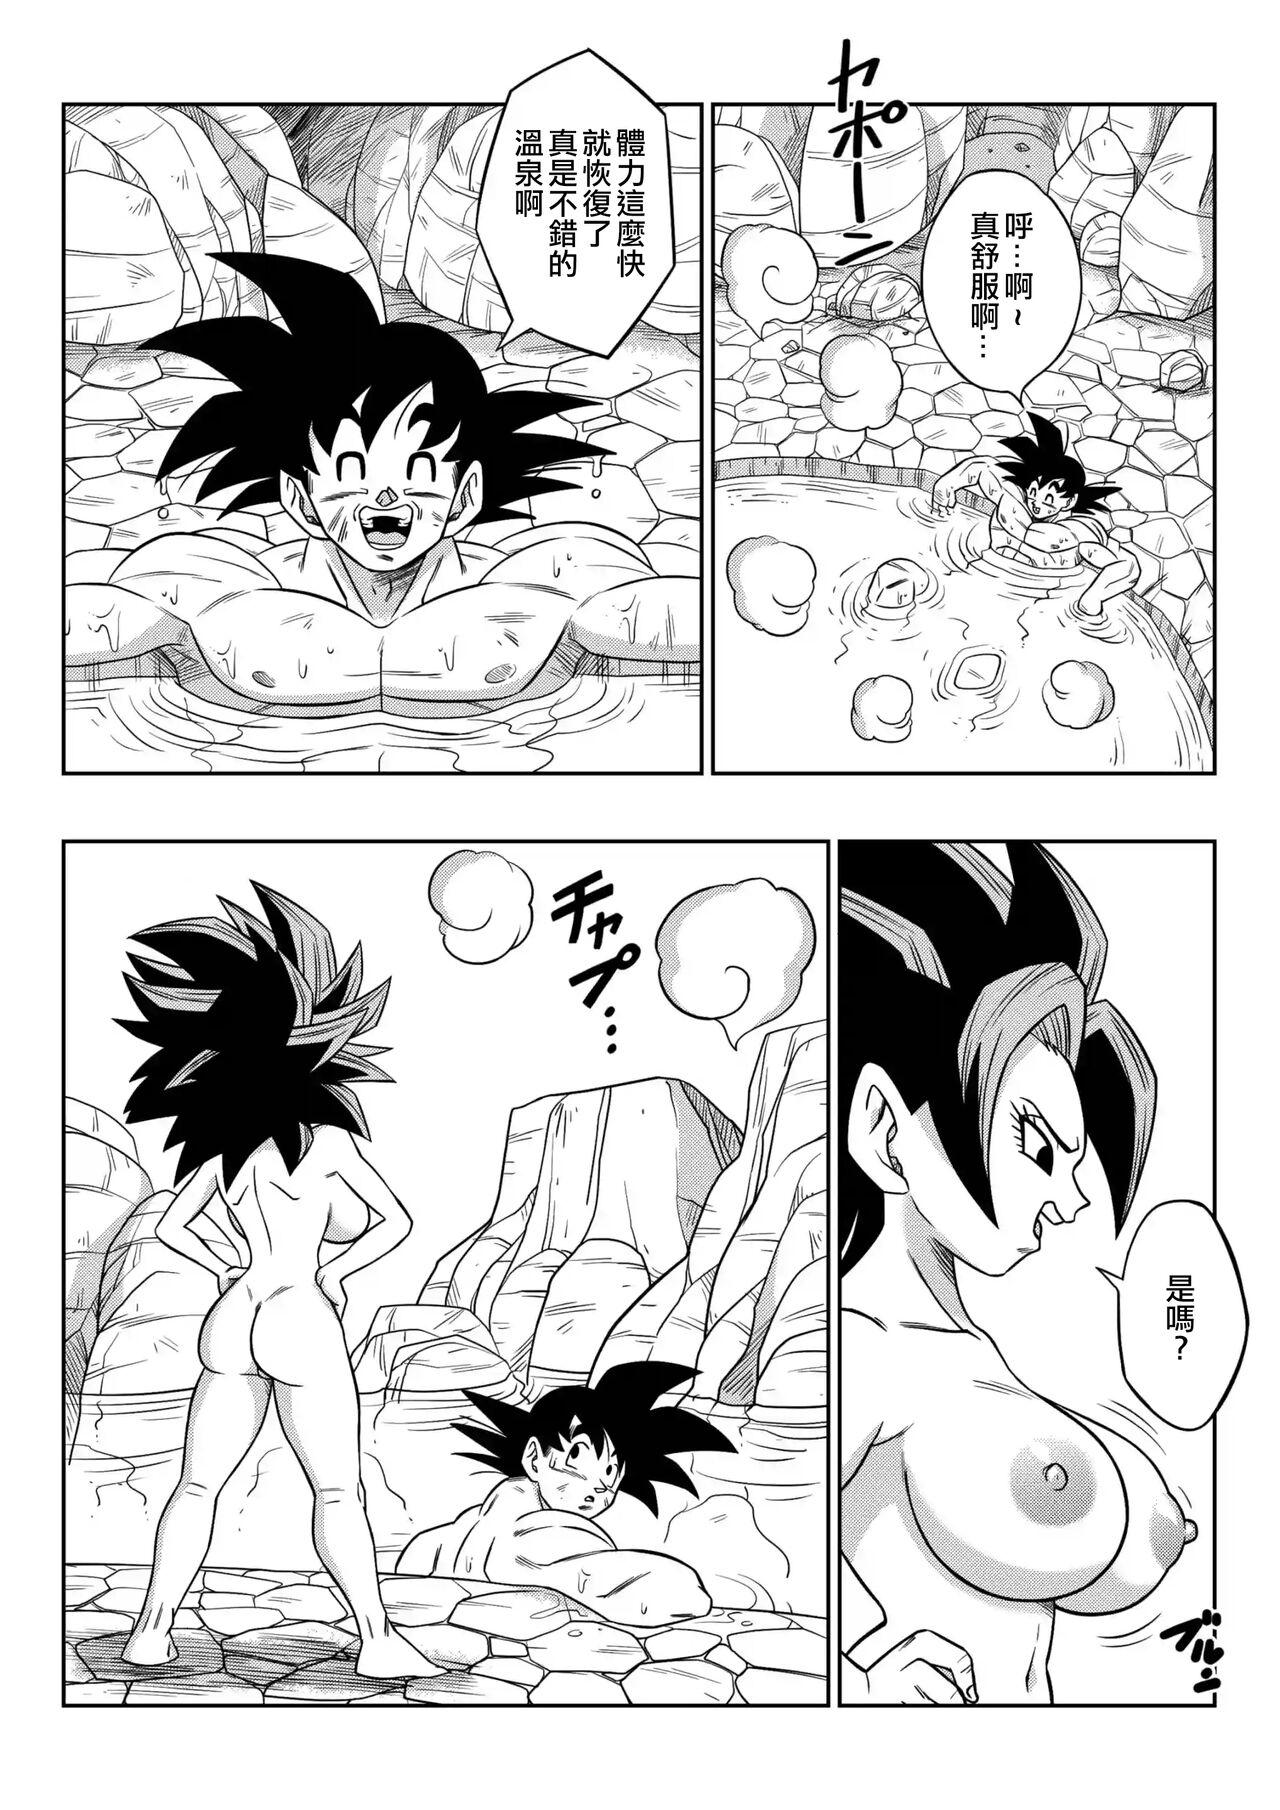 Mms Fight in the 6th Universe!!! - Dragon ball super Imvu - Page 7